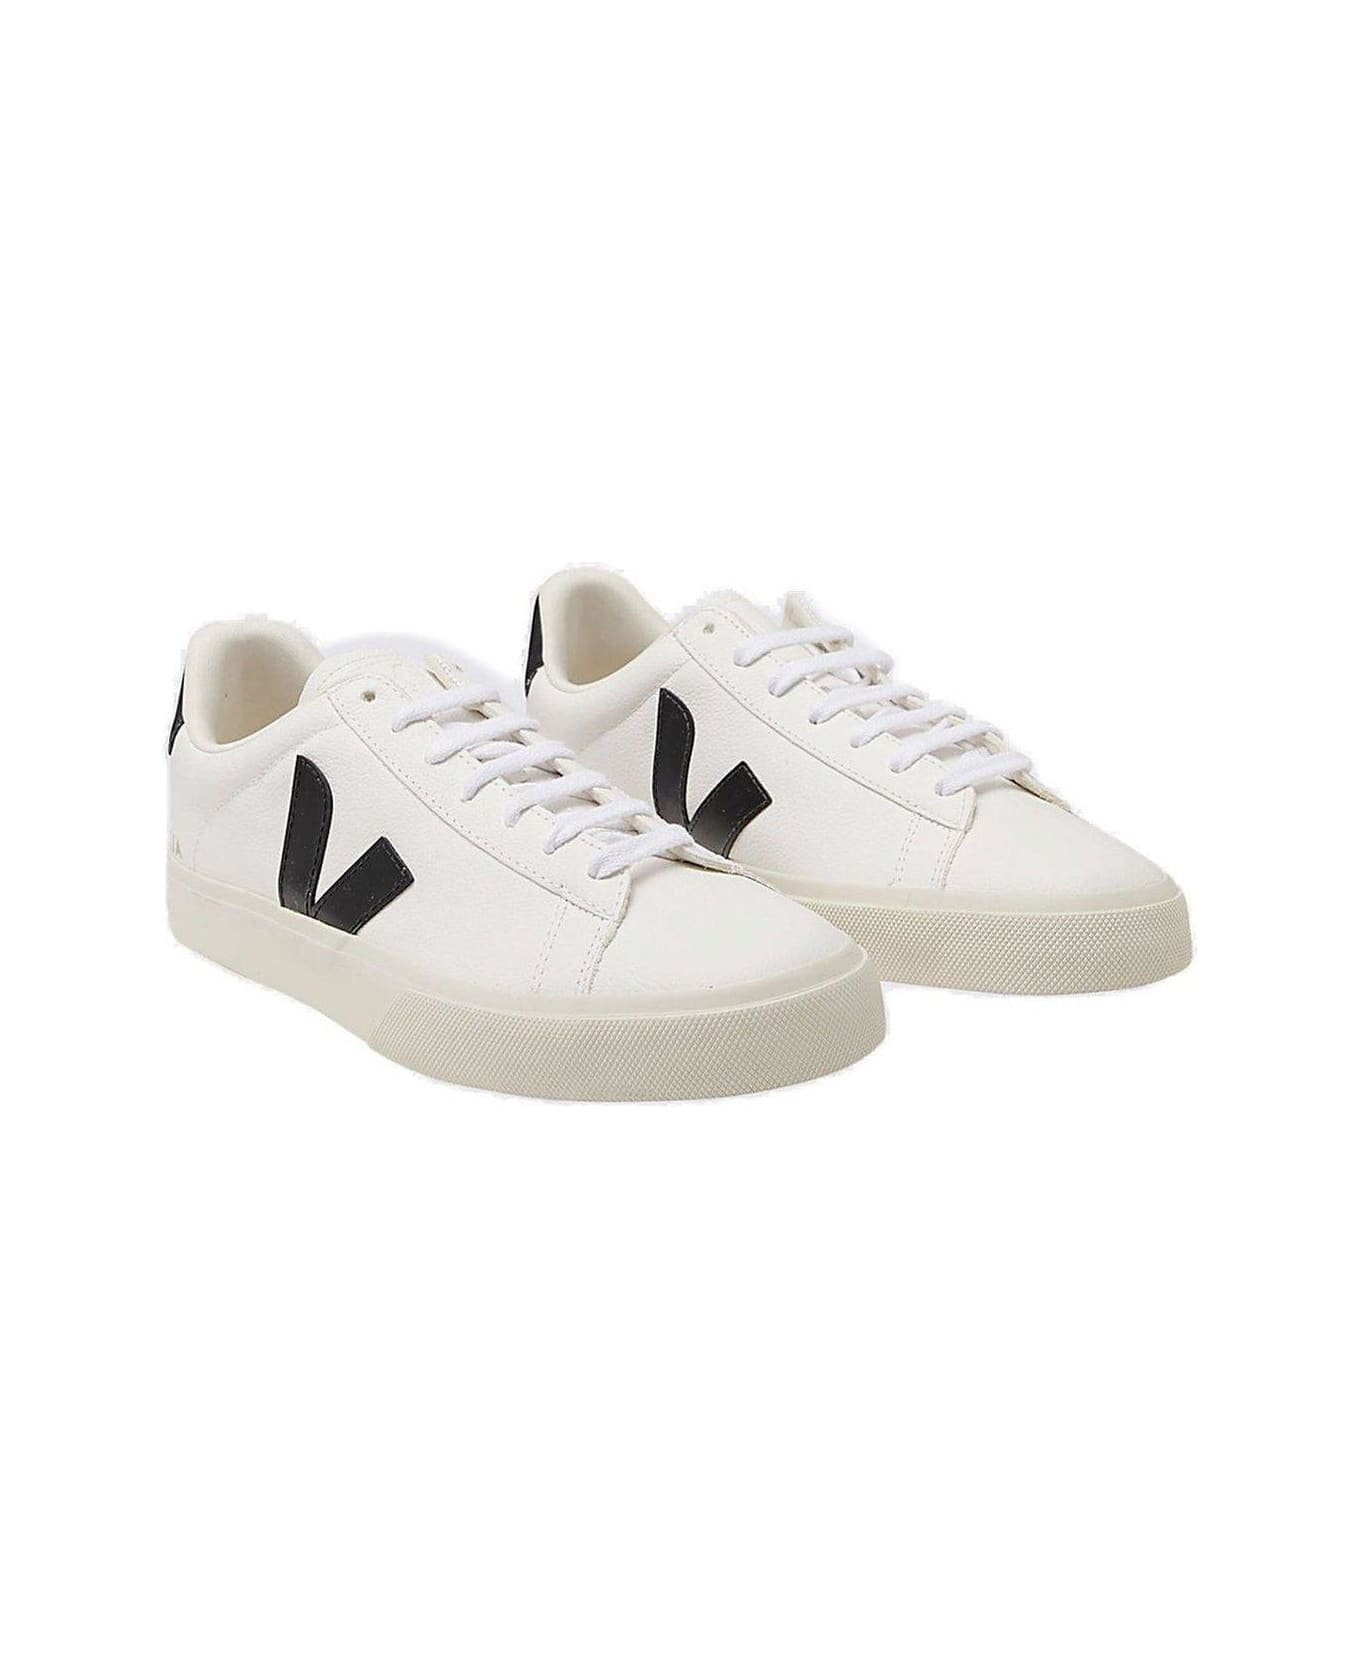 Veja Campo Low-top Sneakers Sneakers - WHITE